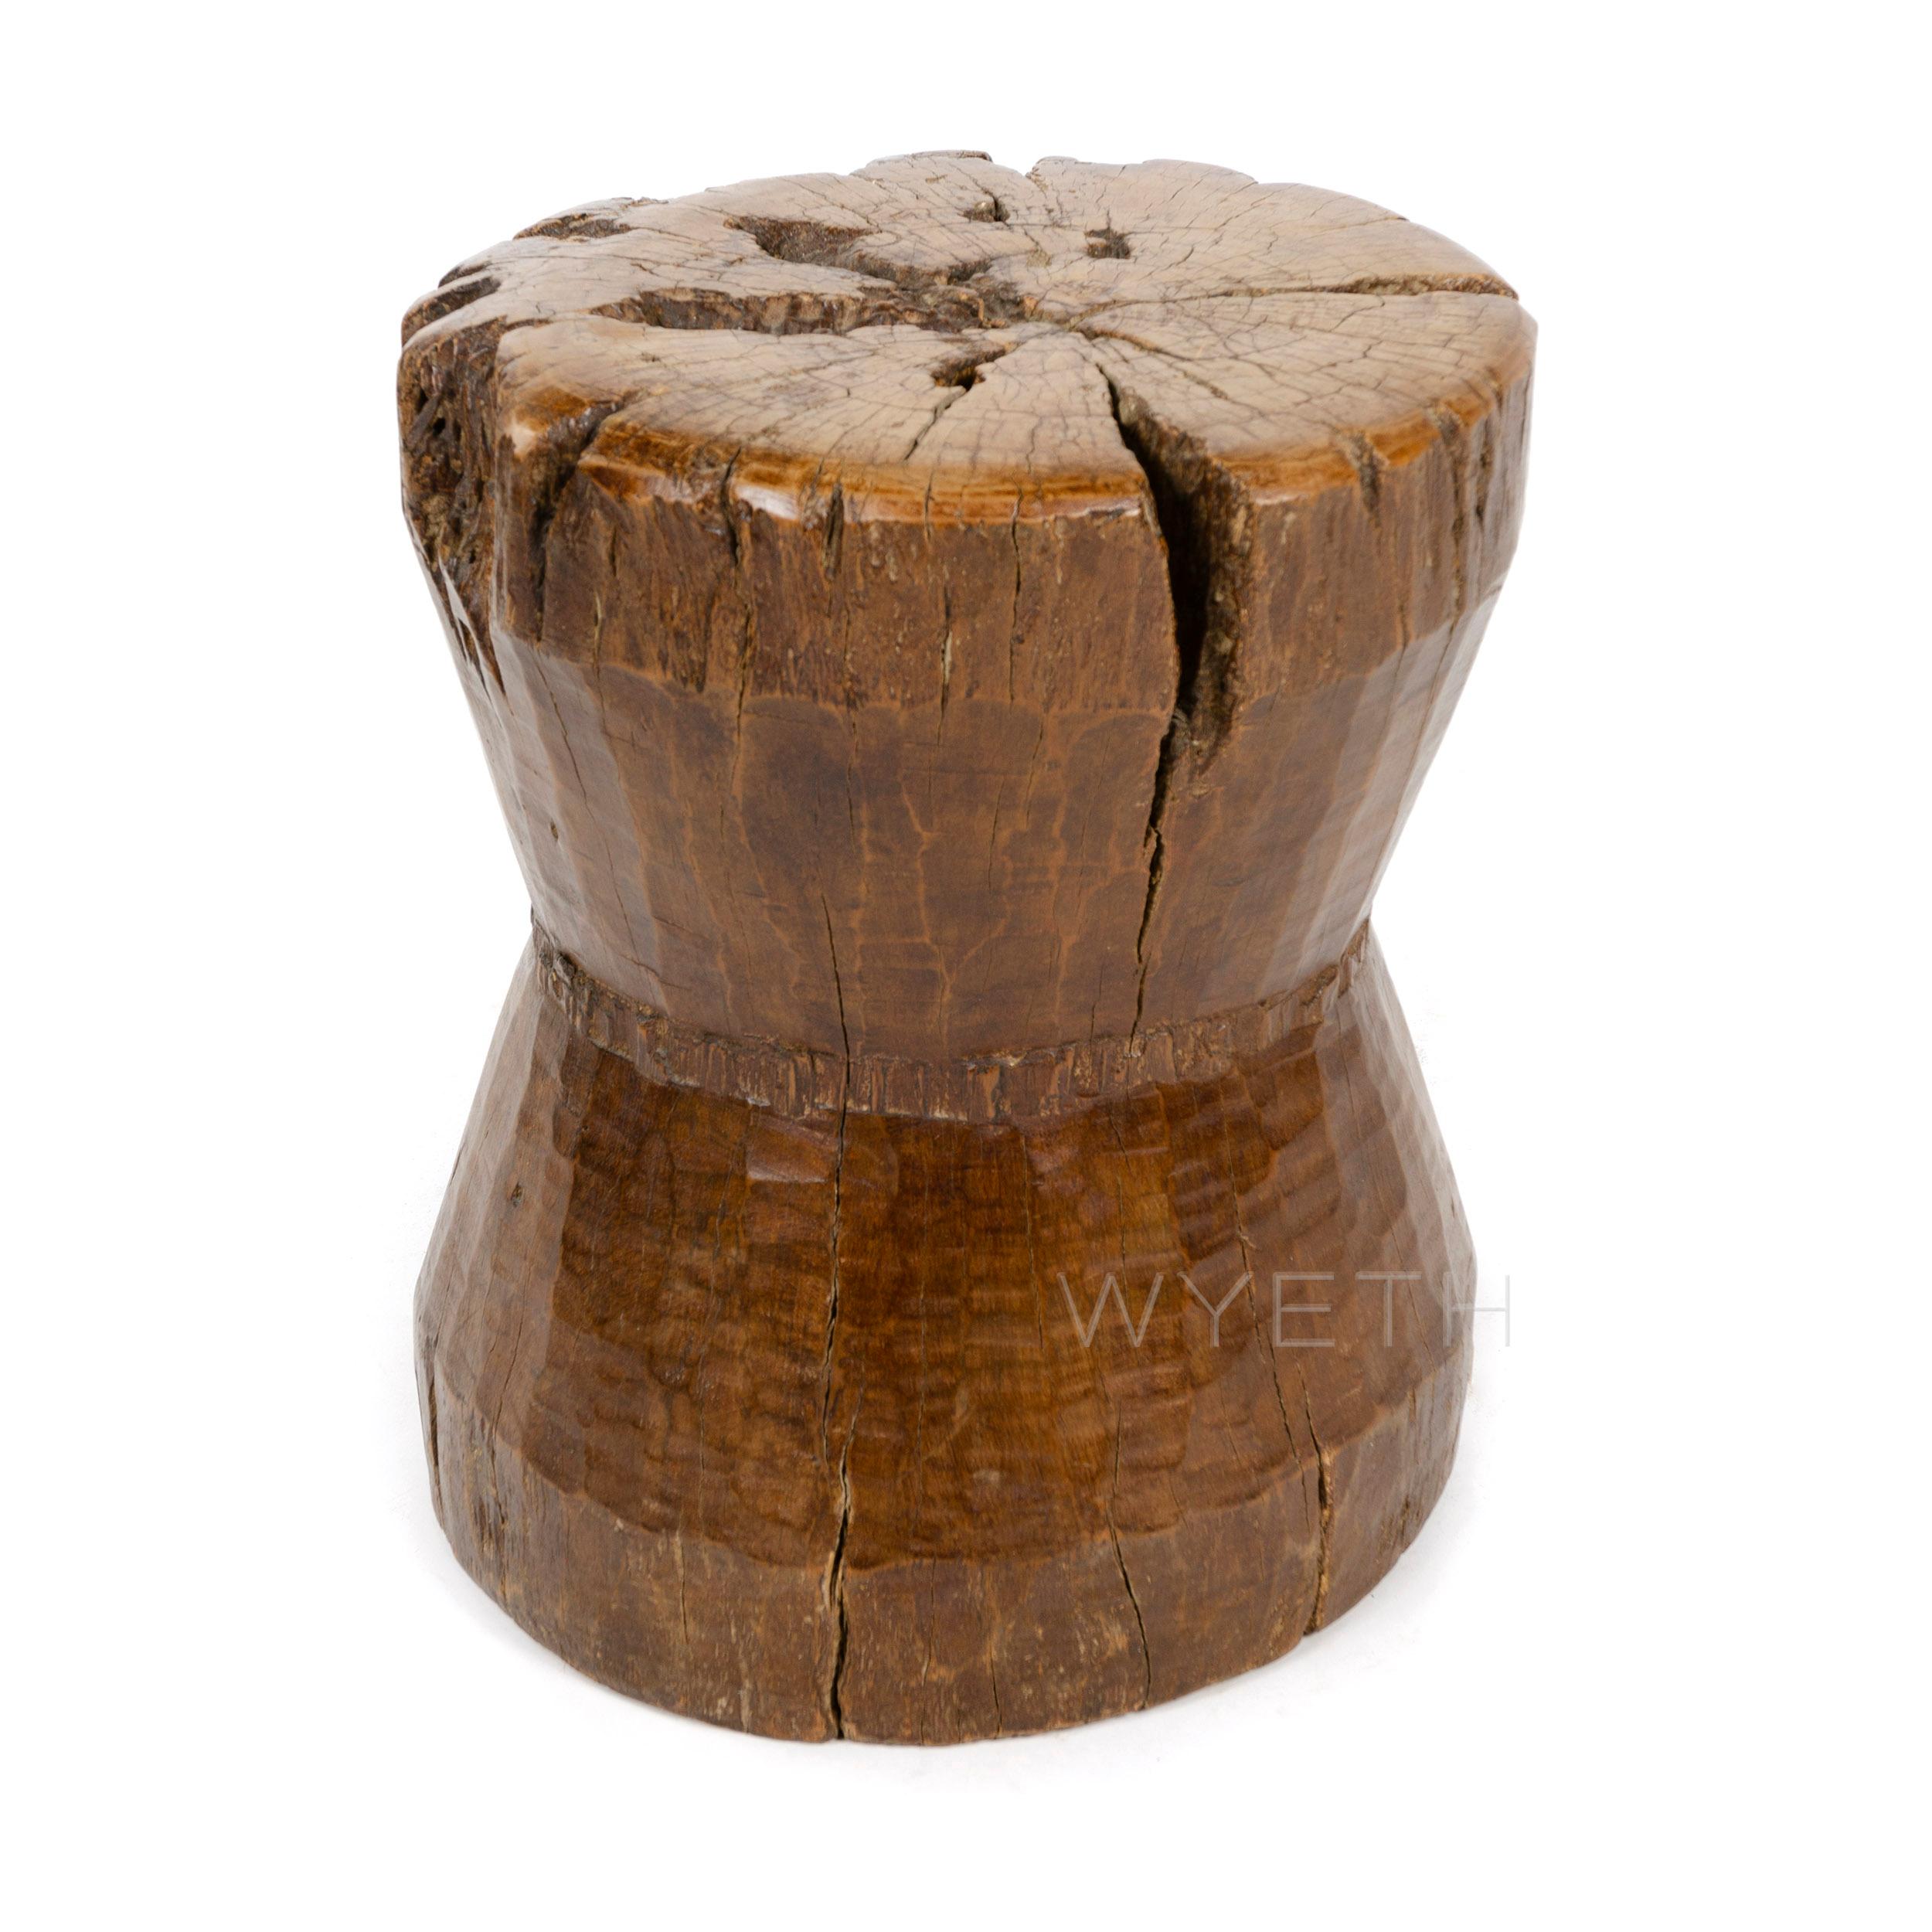 An Indonesian stool with a decorative cinched waist made from hand carved mahogany.